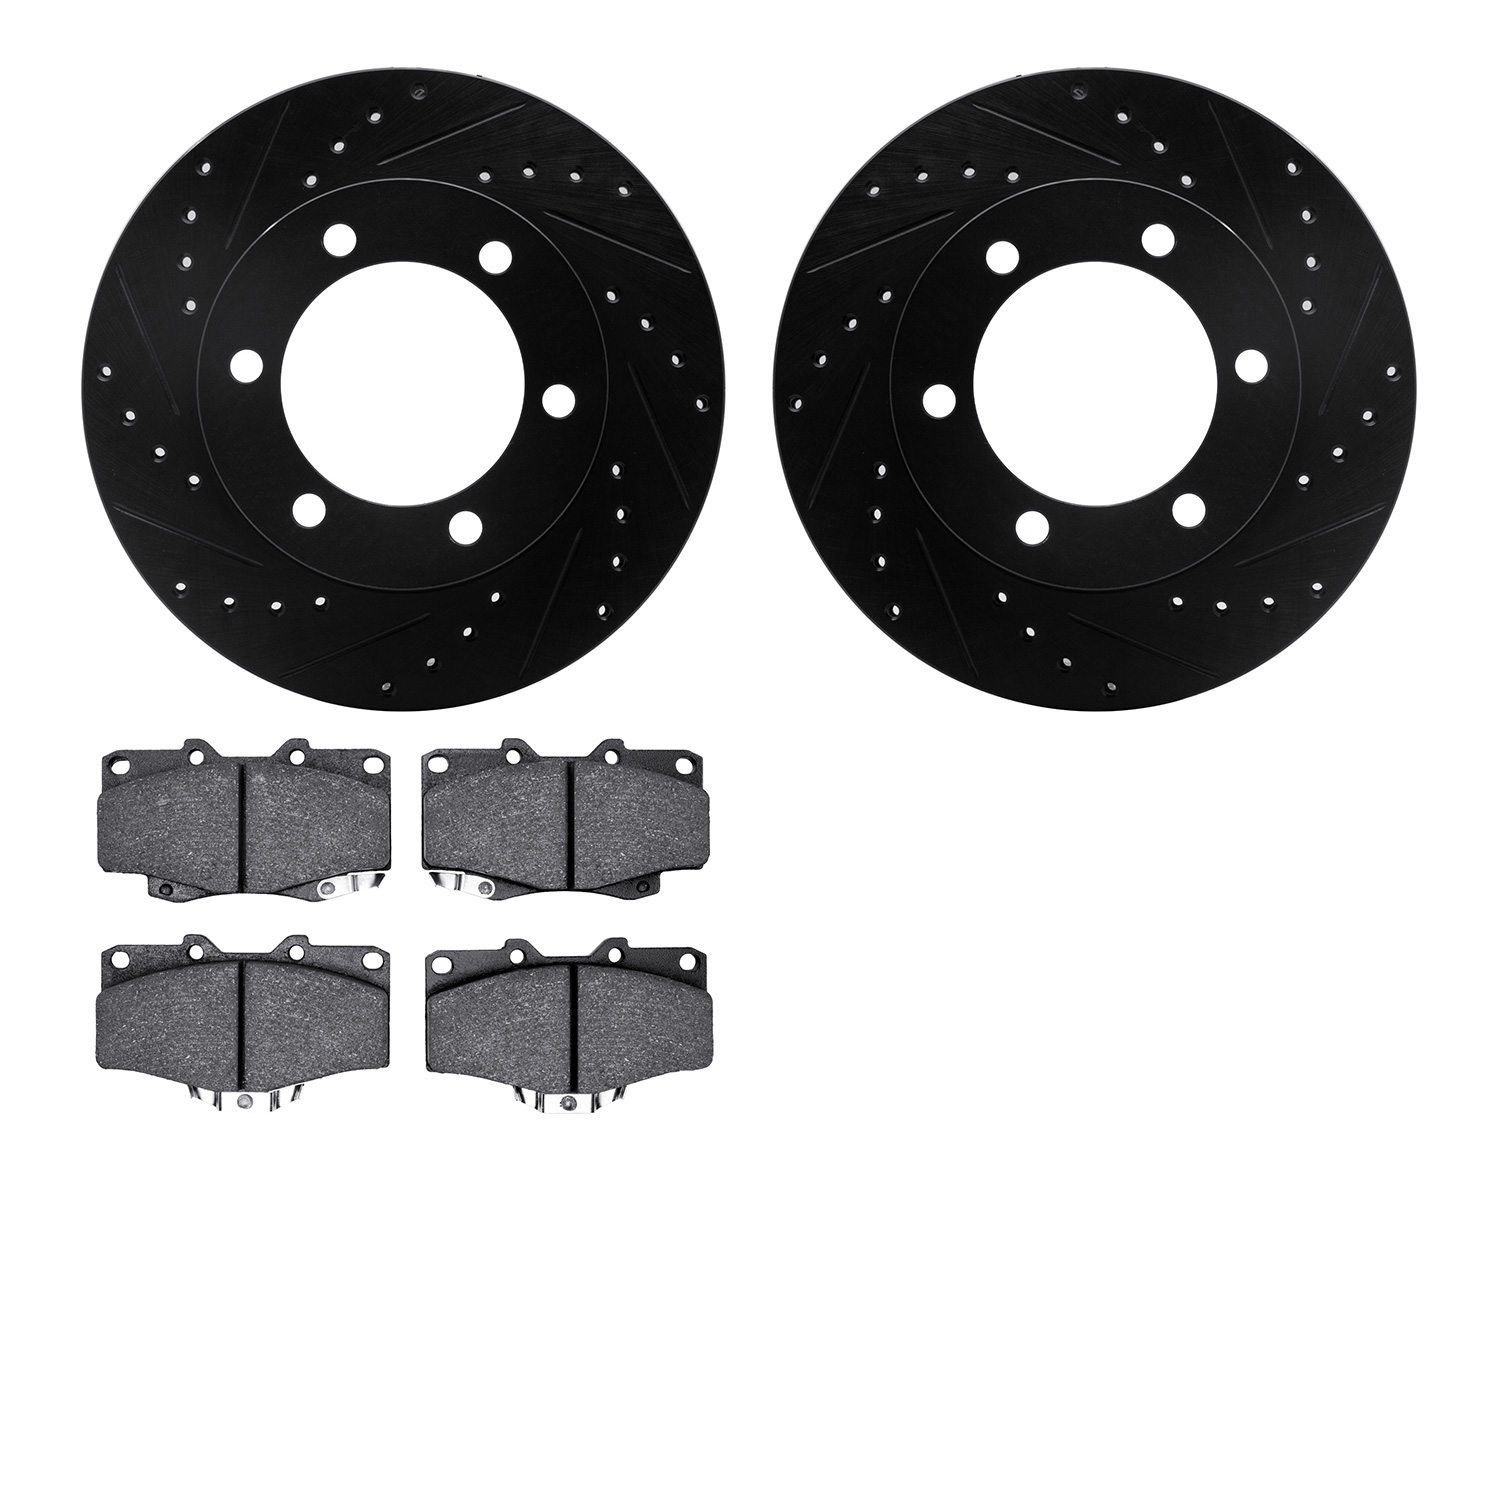 8402-76012 Drilled/Slotted Brake Rotors with Ultimate-Duty Brake Pads Kit [Black], 1995-2004 Lexus/Toyota/Scion, Position: Front